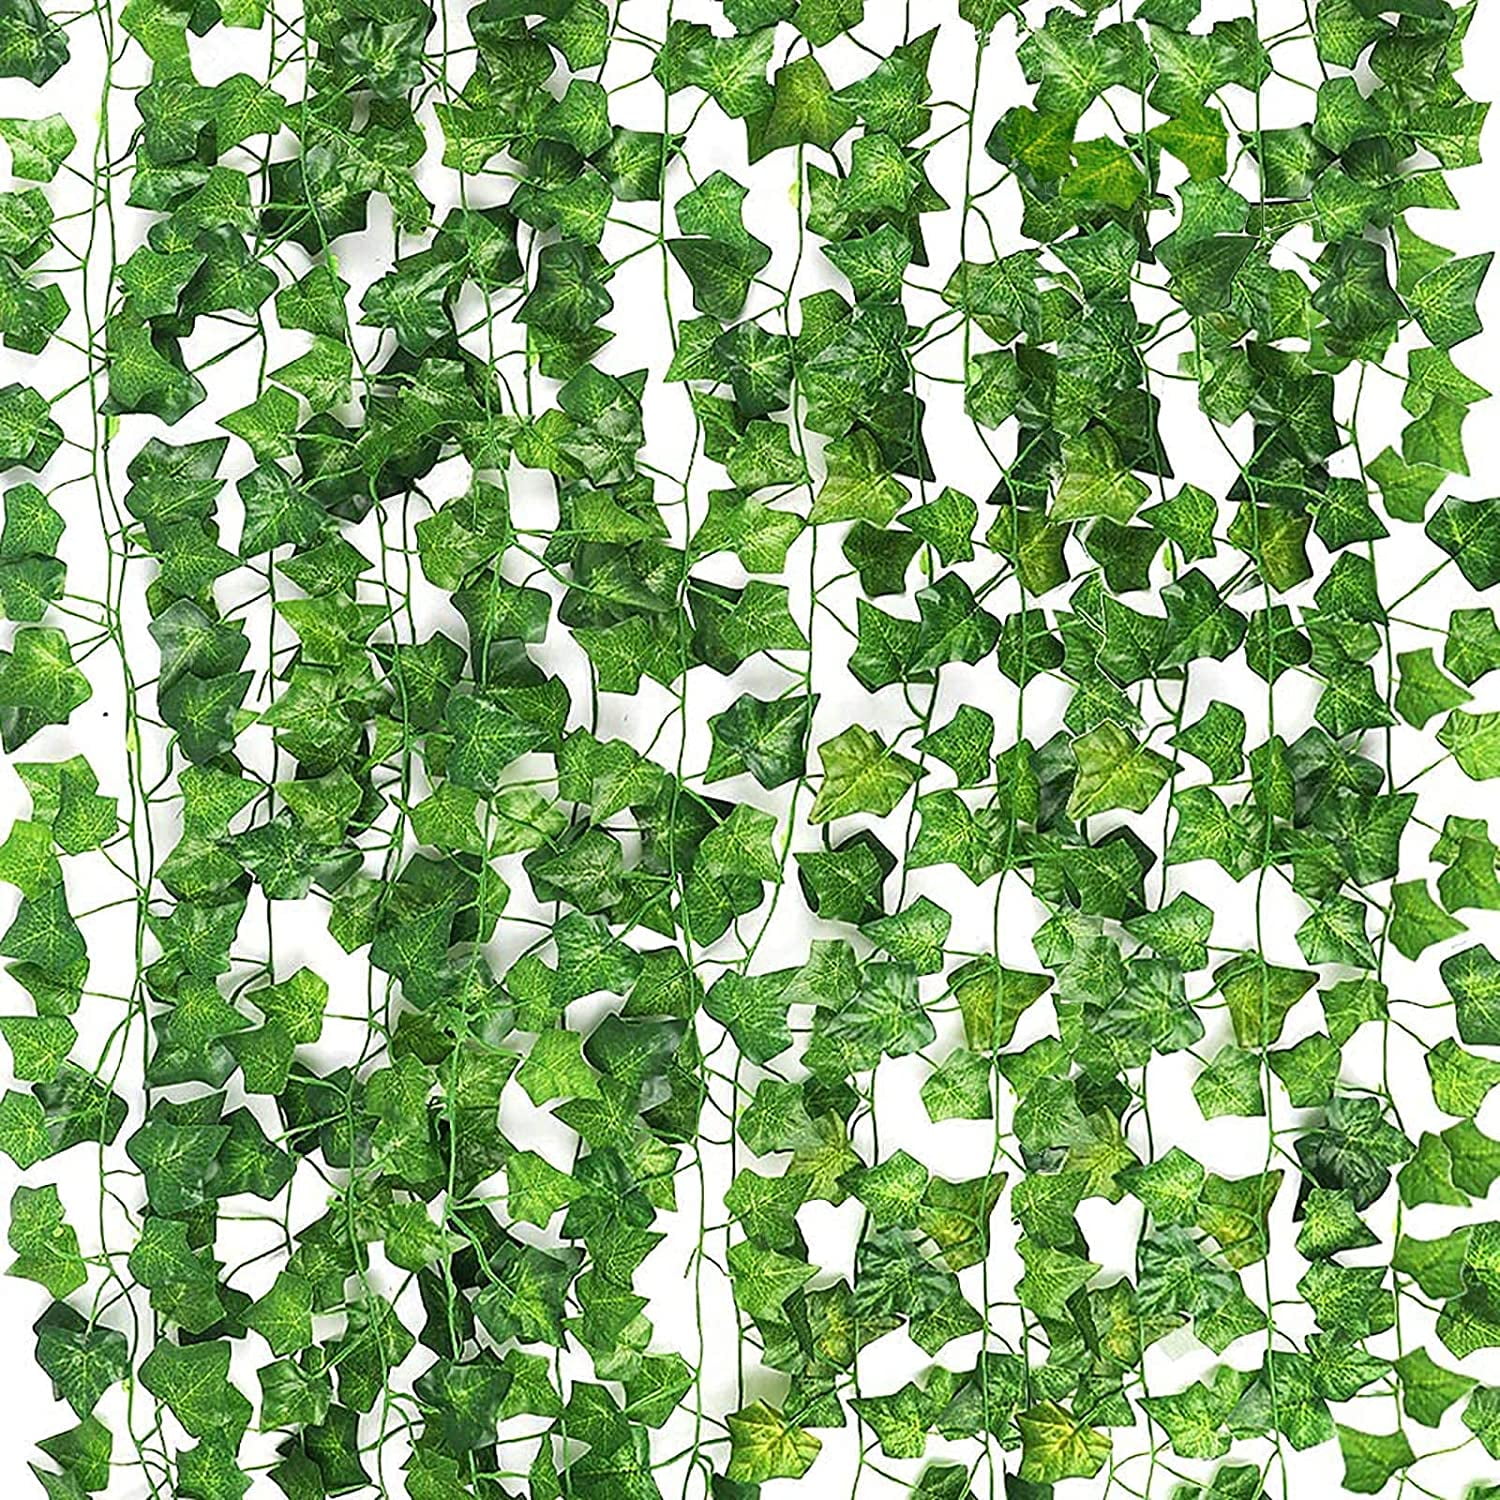 Artificial Hanging Plant Vine Fake Greenery Garland for Wedding Home Decor  150ft - Bed Bath & Beyond - 29115131